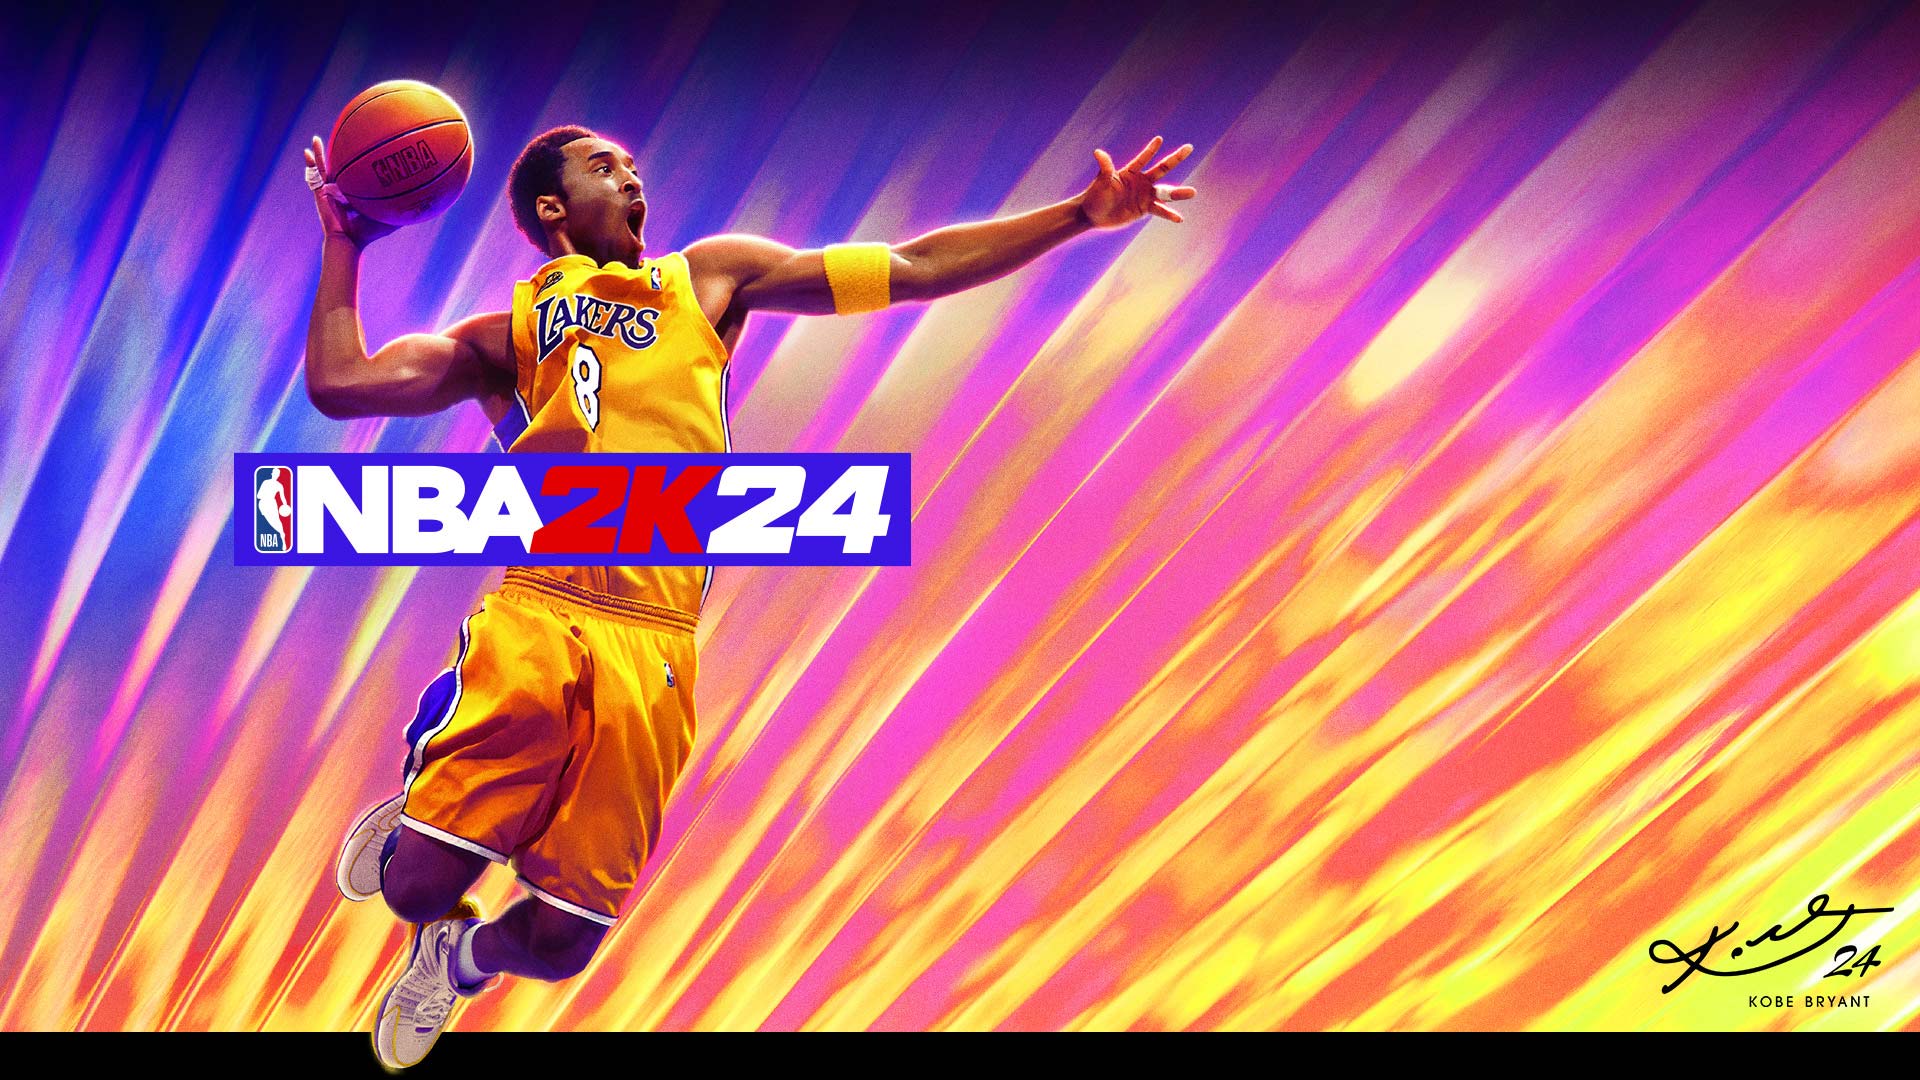  When does the First Season of NBA 2K24 Begin